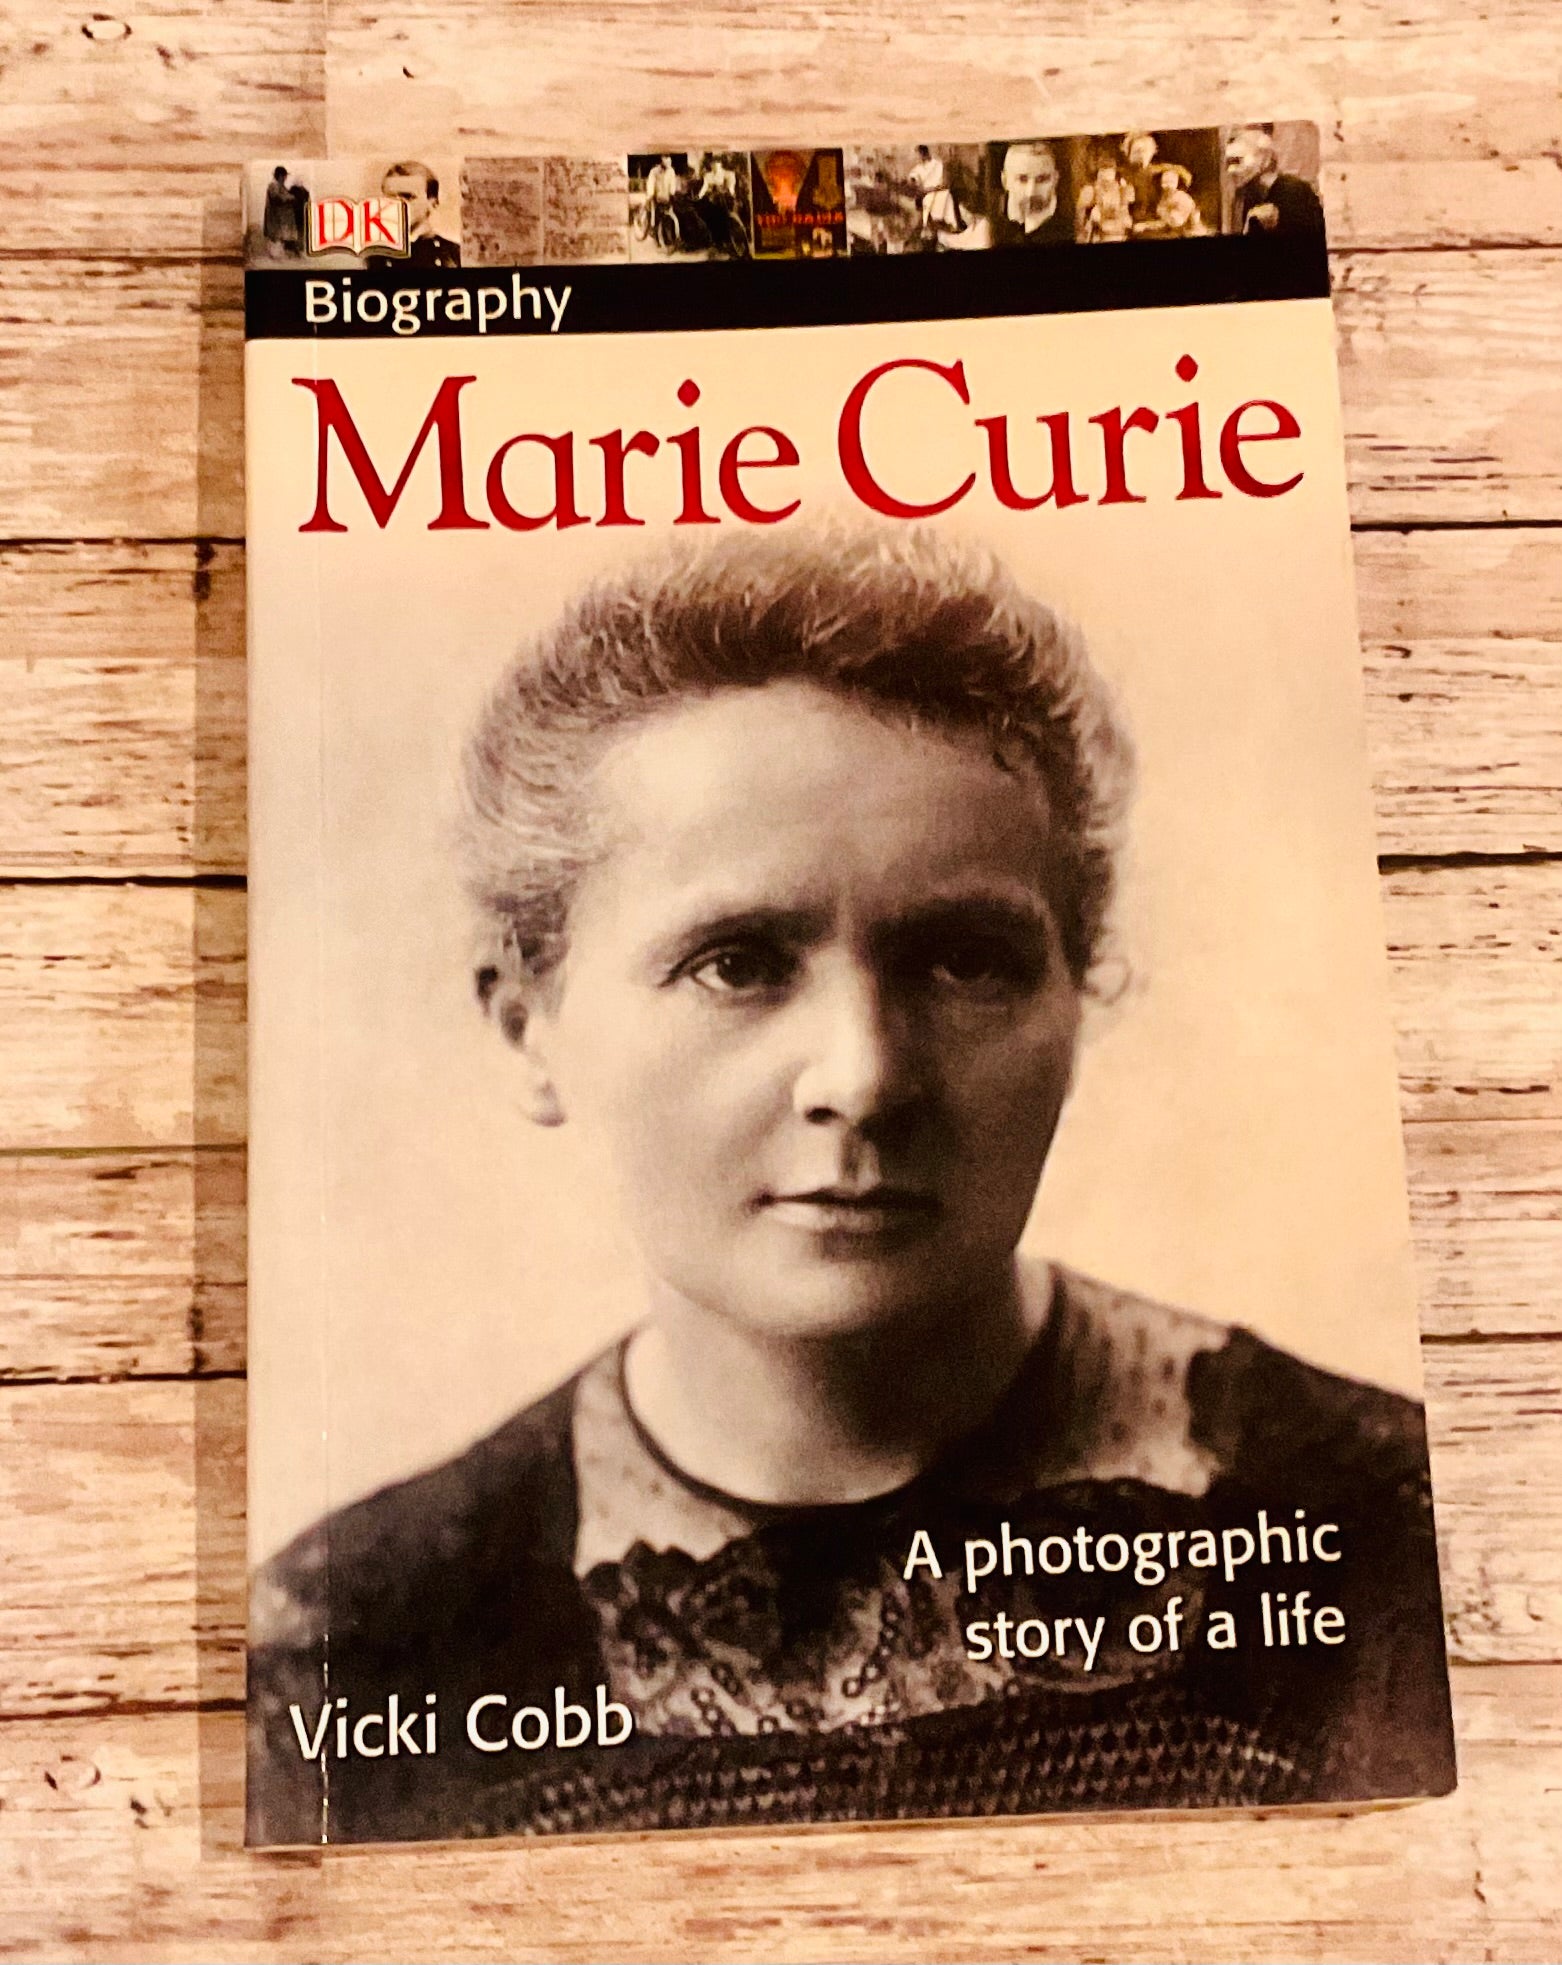 Marie Curie: A photographic story of a life - Anchored Homeschool Resource Center